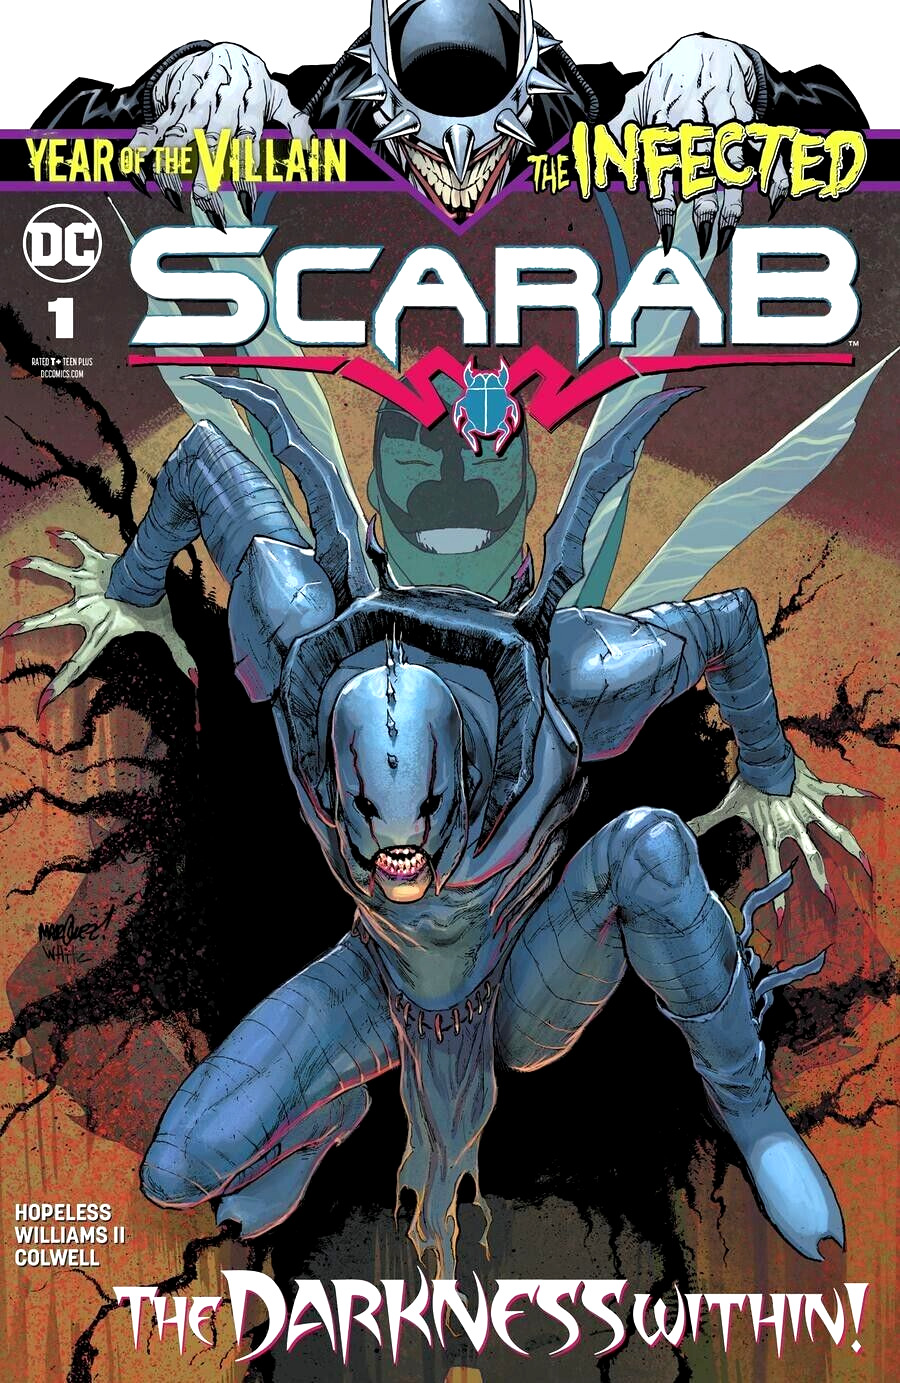 THE INFECTED SCARAB YEAR OF THE VILLAIN #1 CVR A 2019 DC COMICS NM